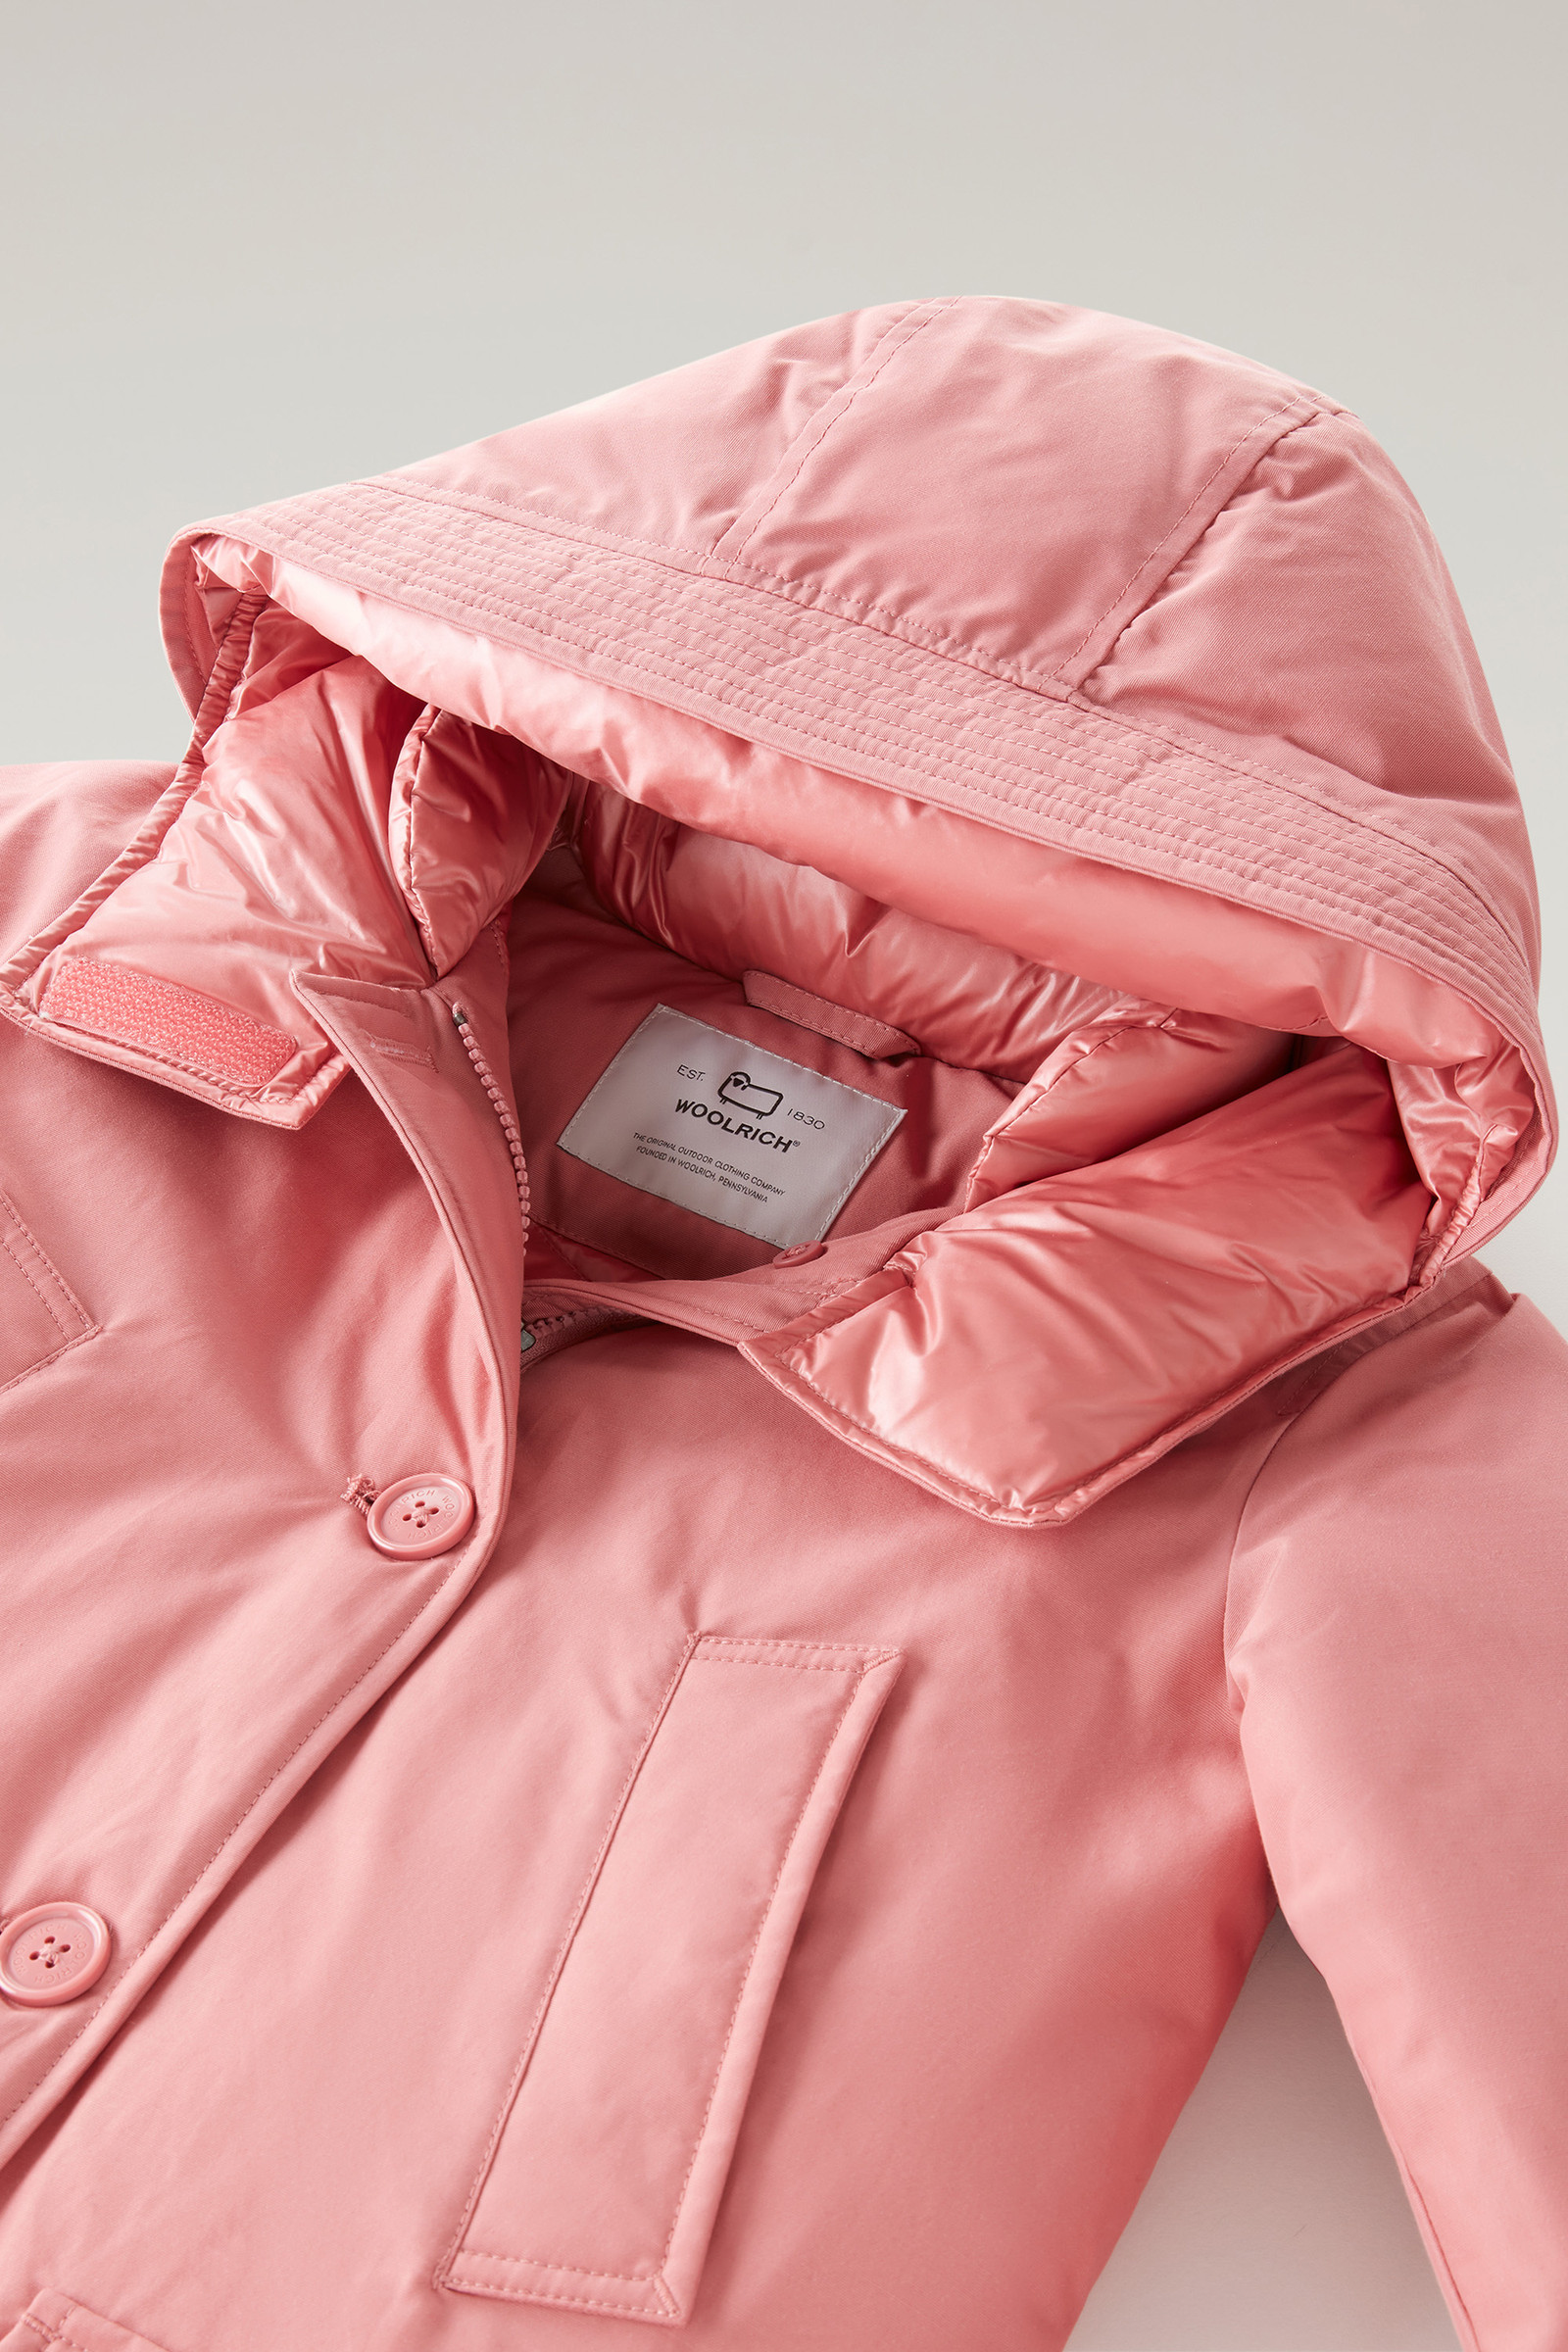 Girl's Arctic Parka in Ramar Cloth with Satin Details Pink | Woolrich USA